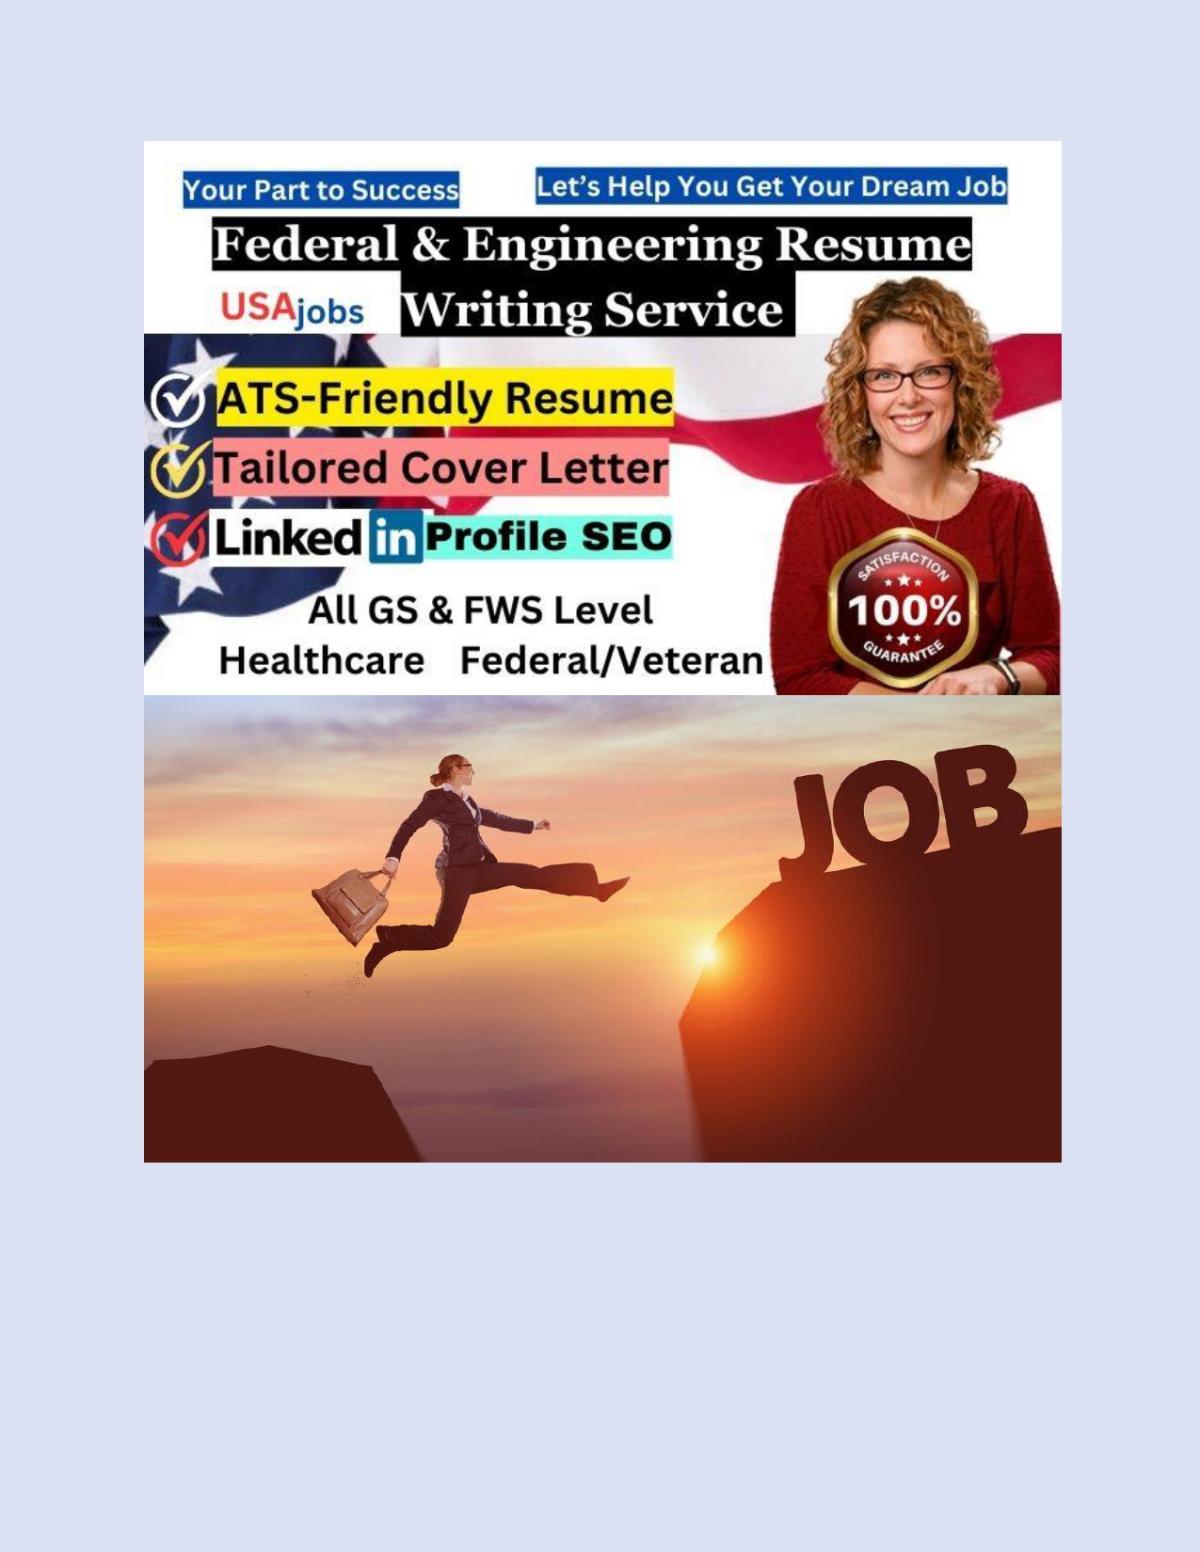 I will write best federal resume ksa ecq for usajobs, engineering resume in 24hrs